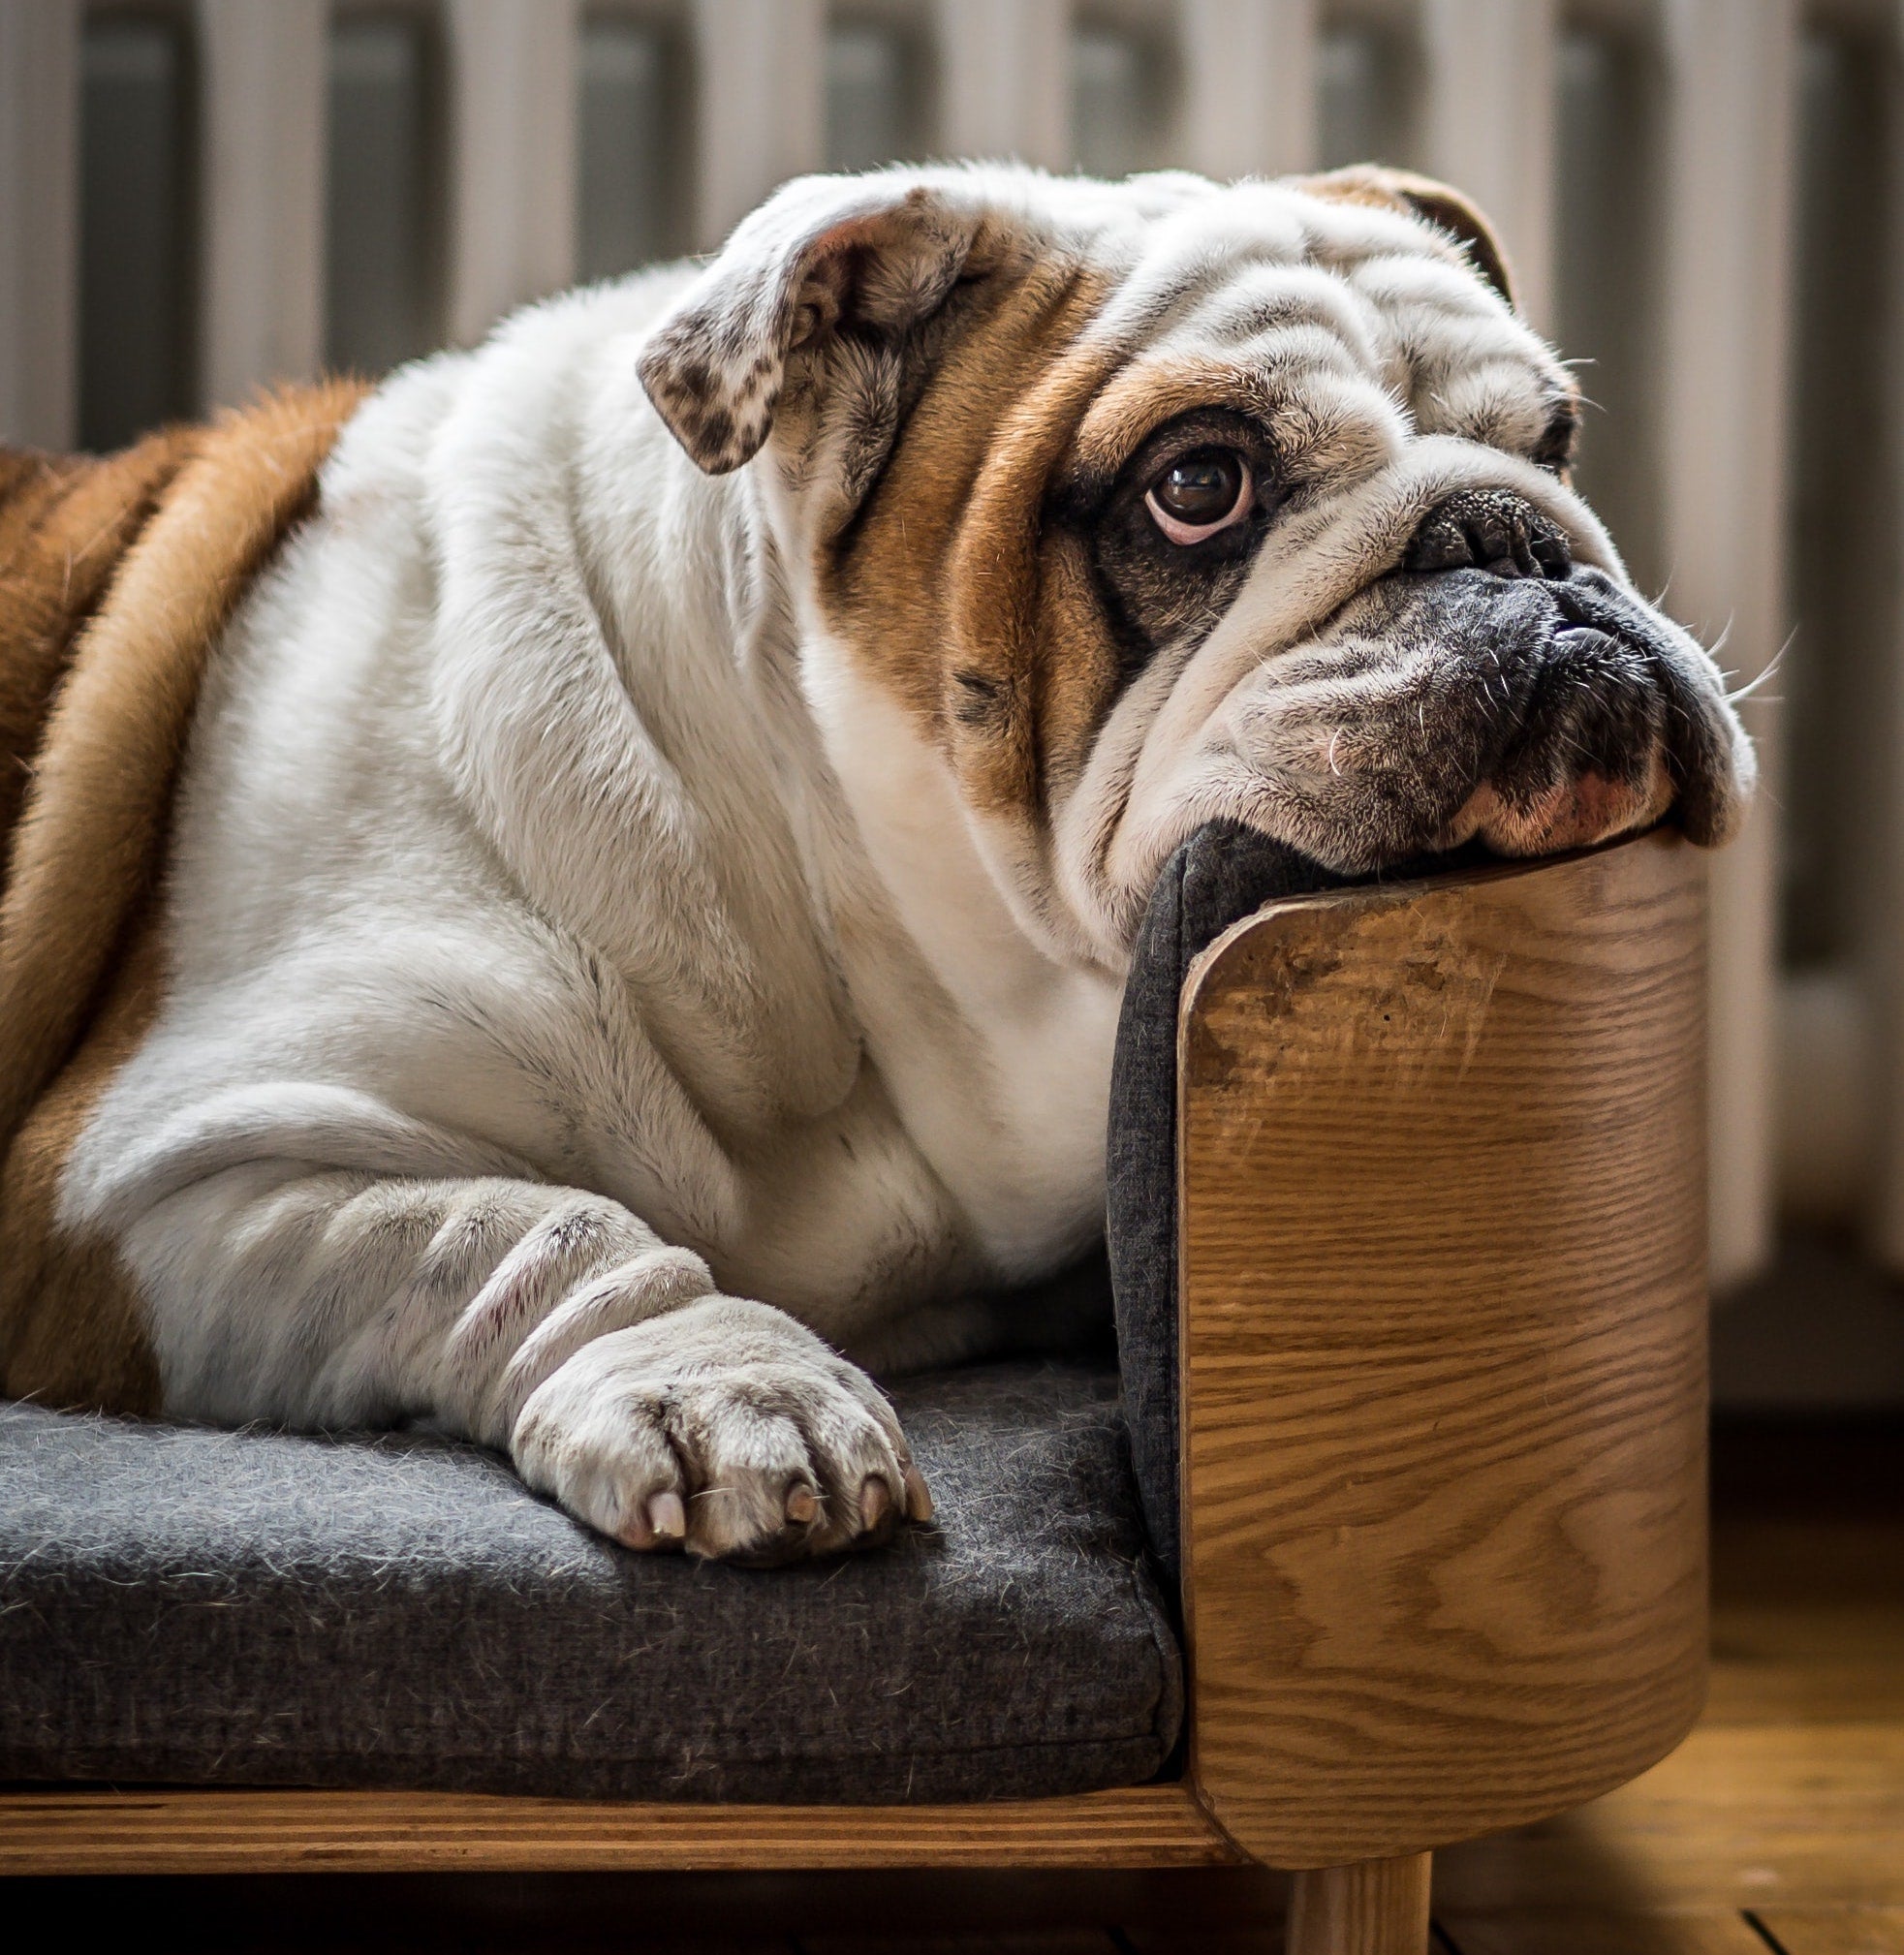 How to help your overweight dog get back to a healthy weight